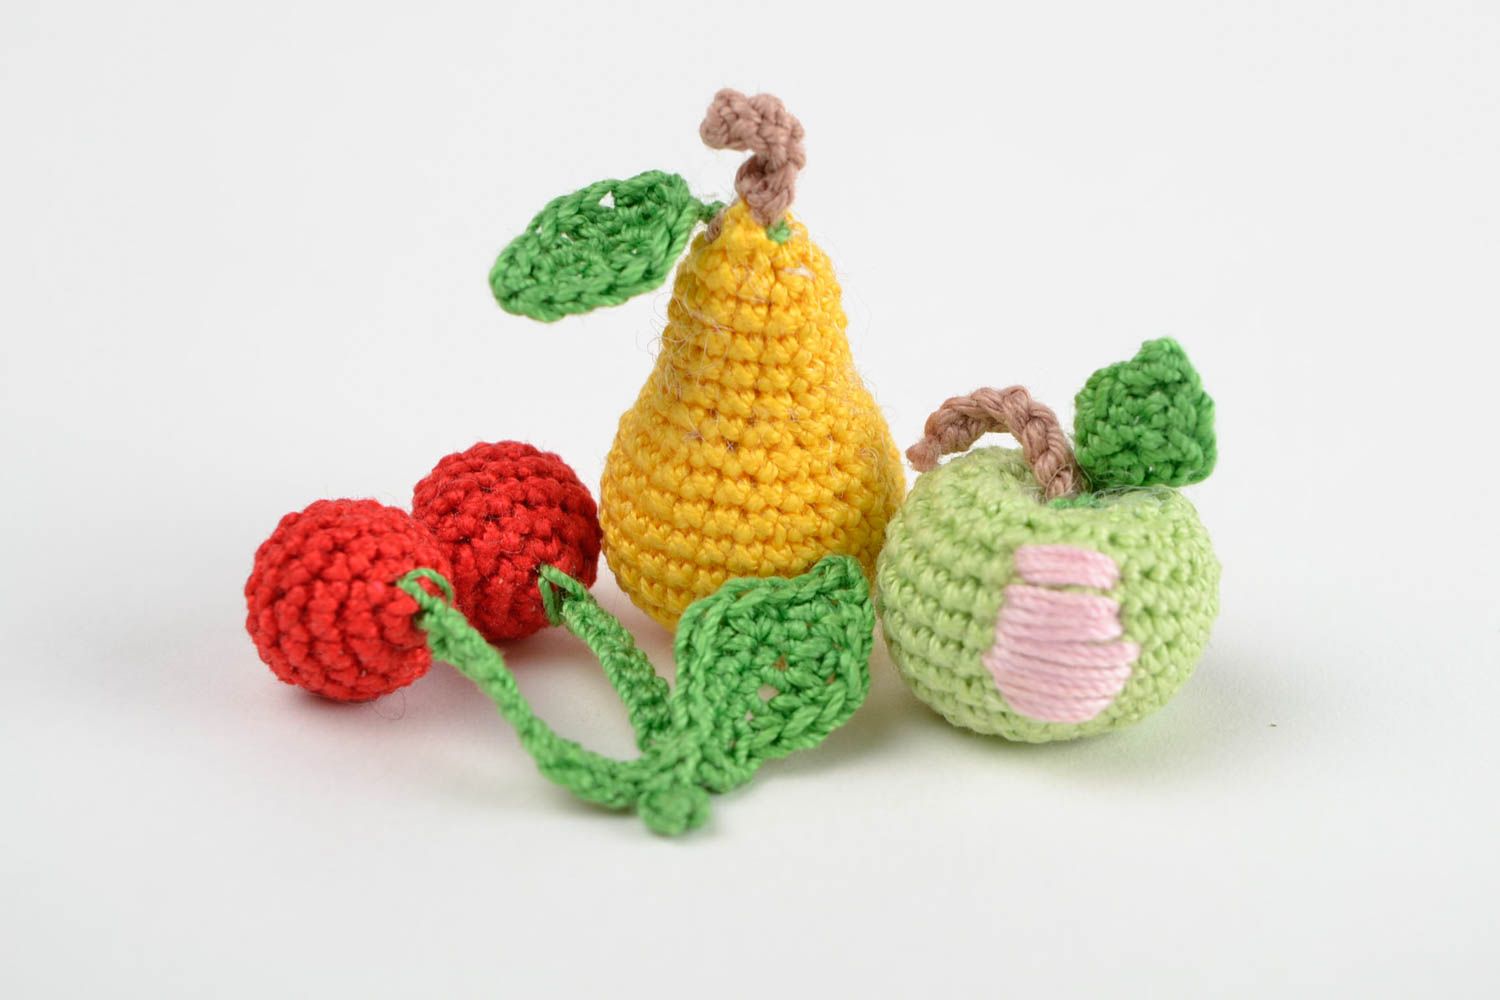 Handmade toy unusual toy for kids designer soft toy crocheted toy set of 4 items photo 3